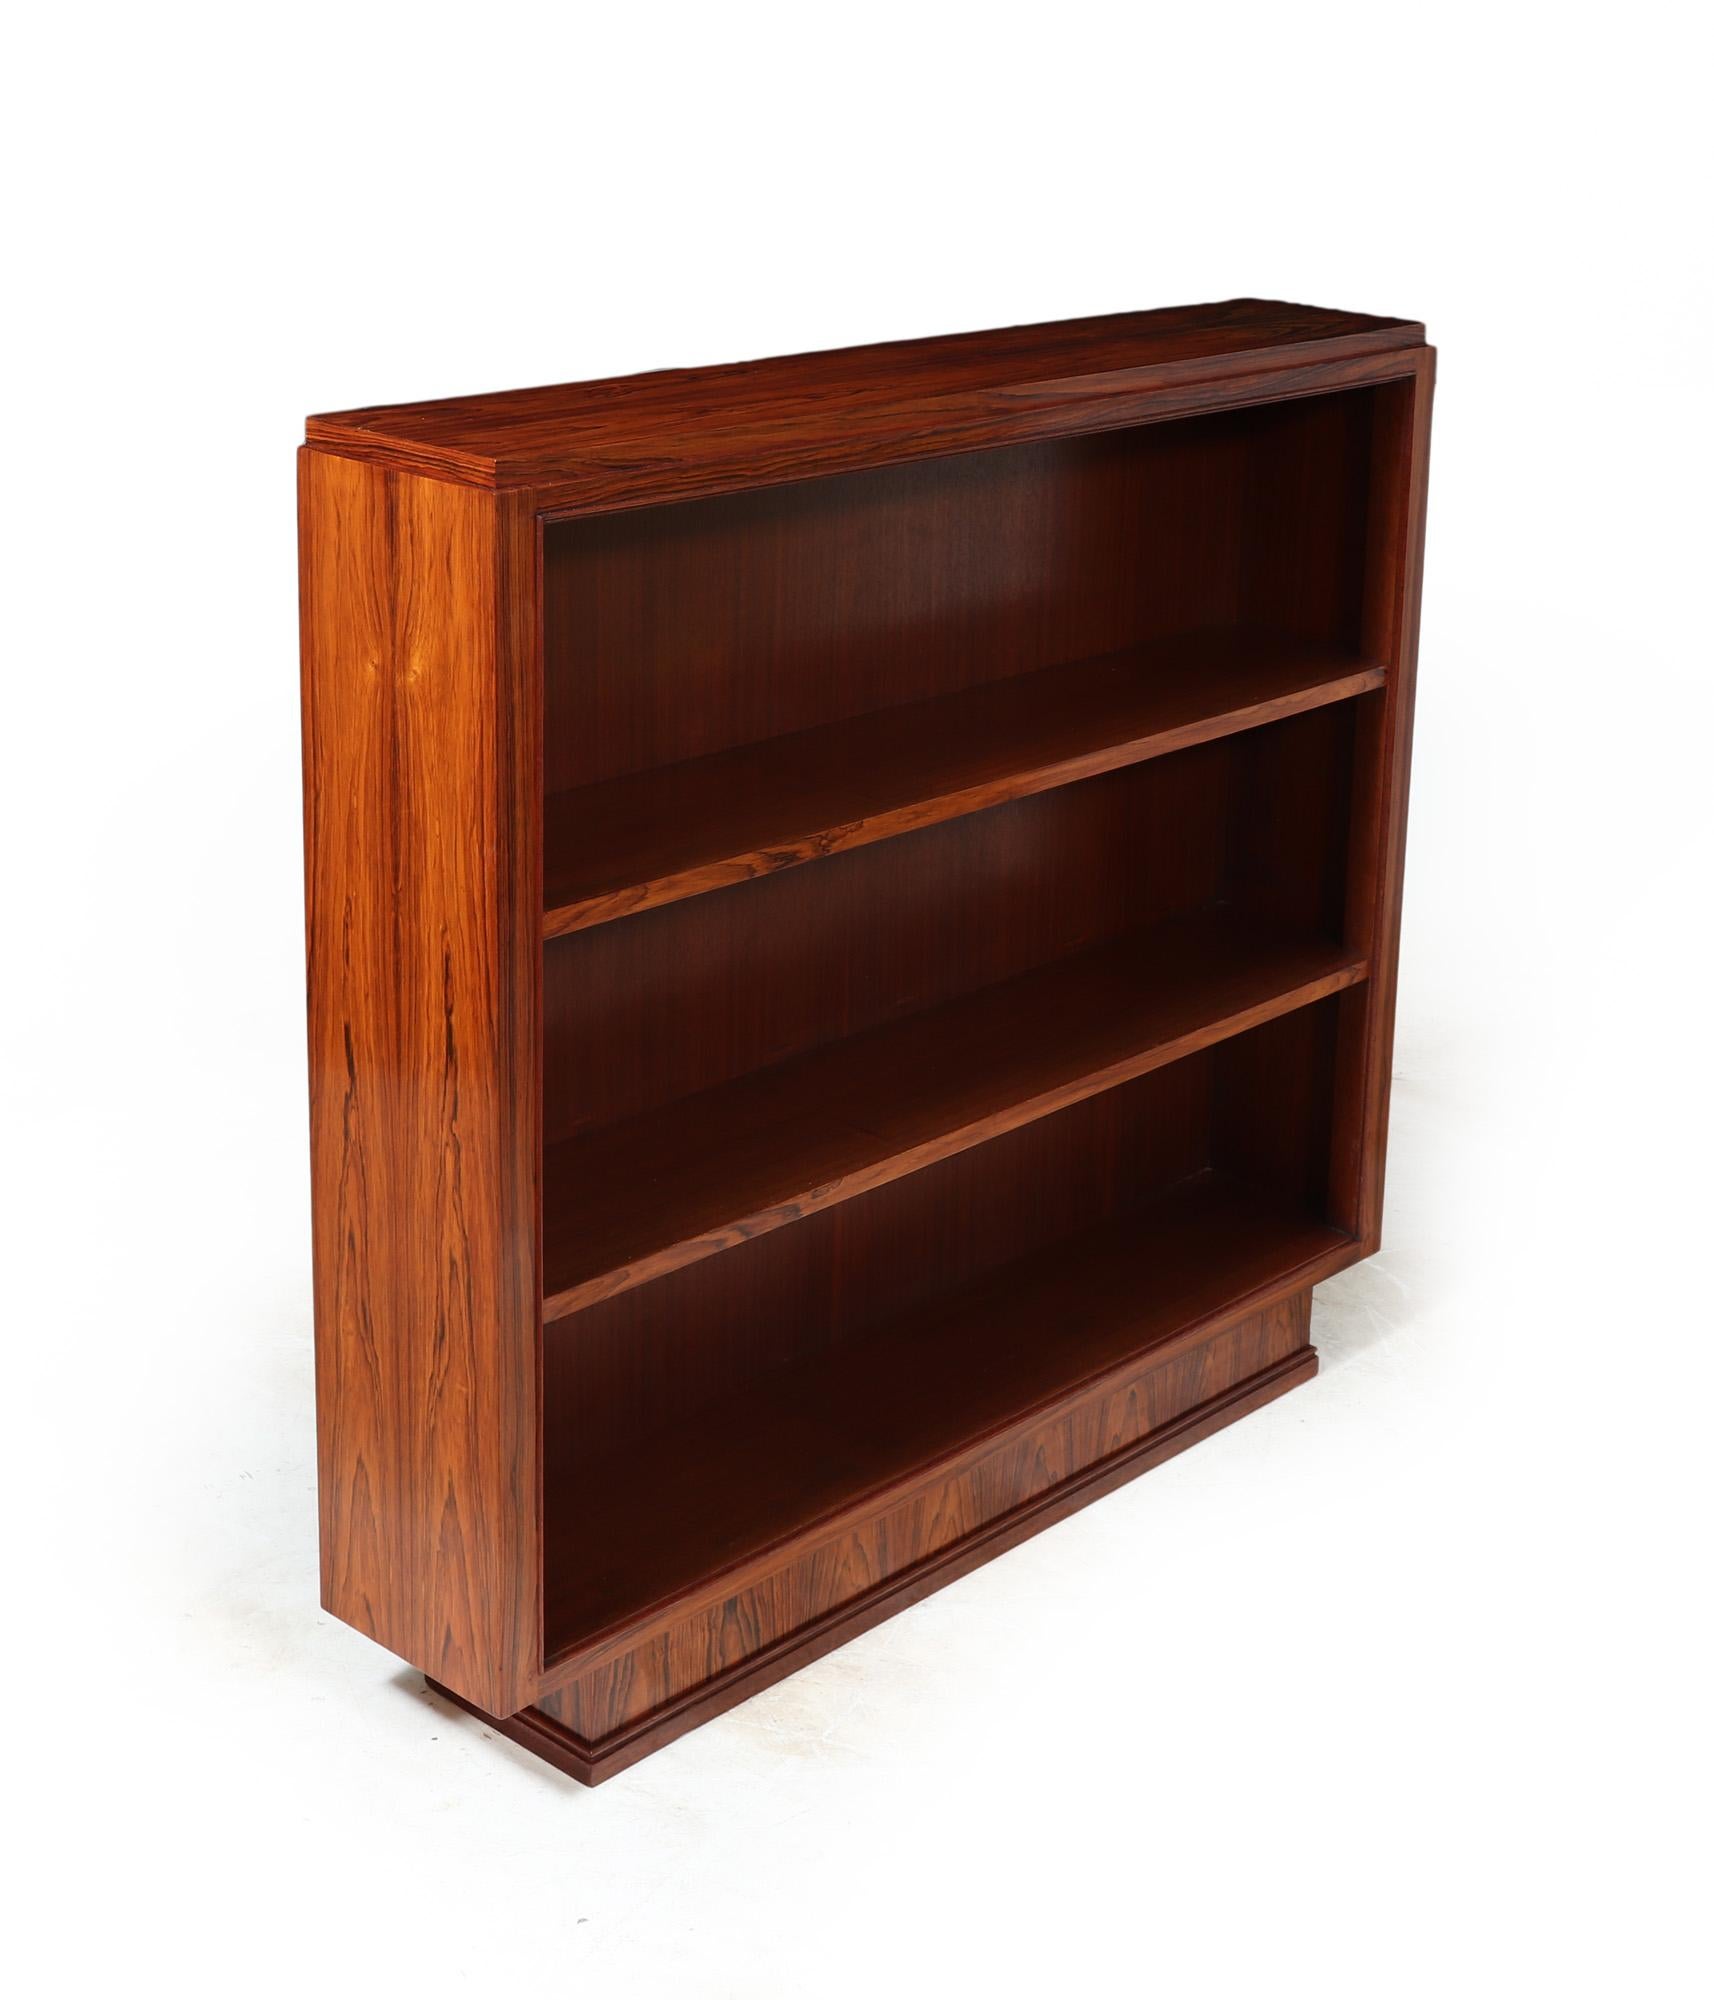 ART DECO OPEN BOOKCASE
A French Art Deco bookcase produced in France around 1930, has two fixed shelves, very good quality and simplistic design the bookcase has been carefully restored and fully polished and in excellent condition throughout

Age: